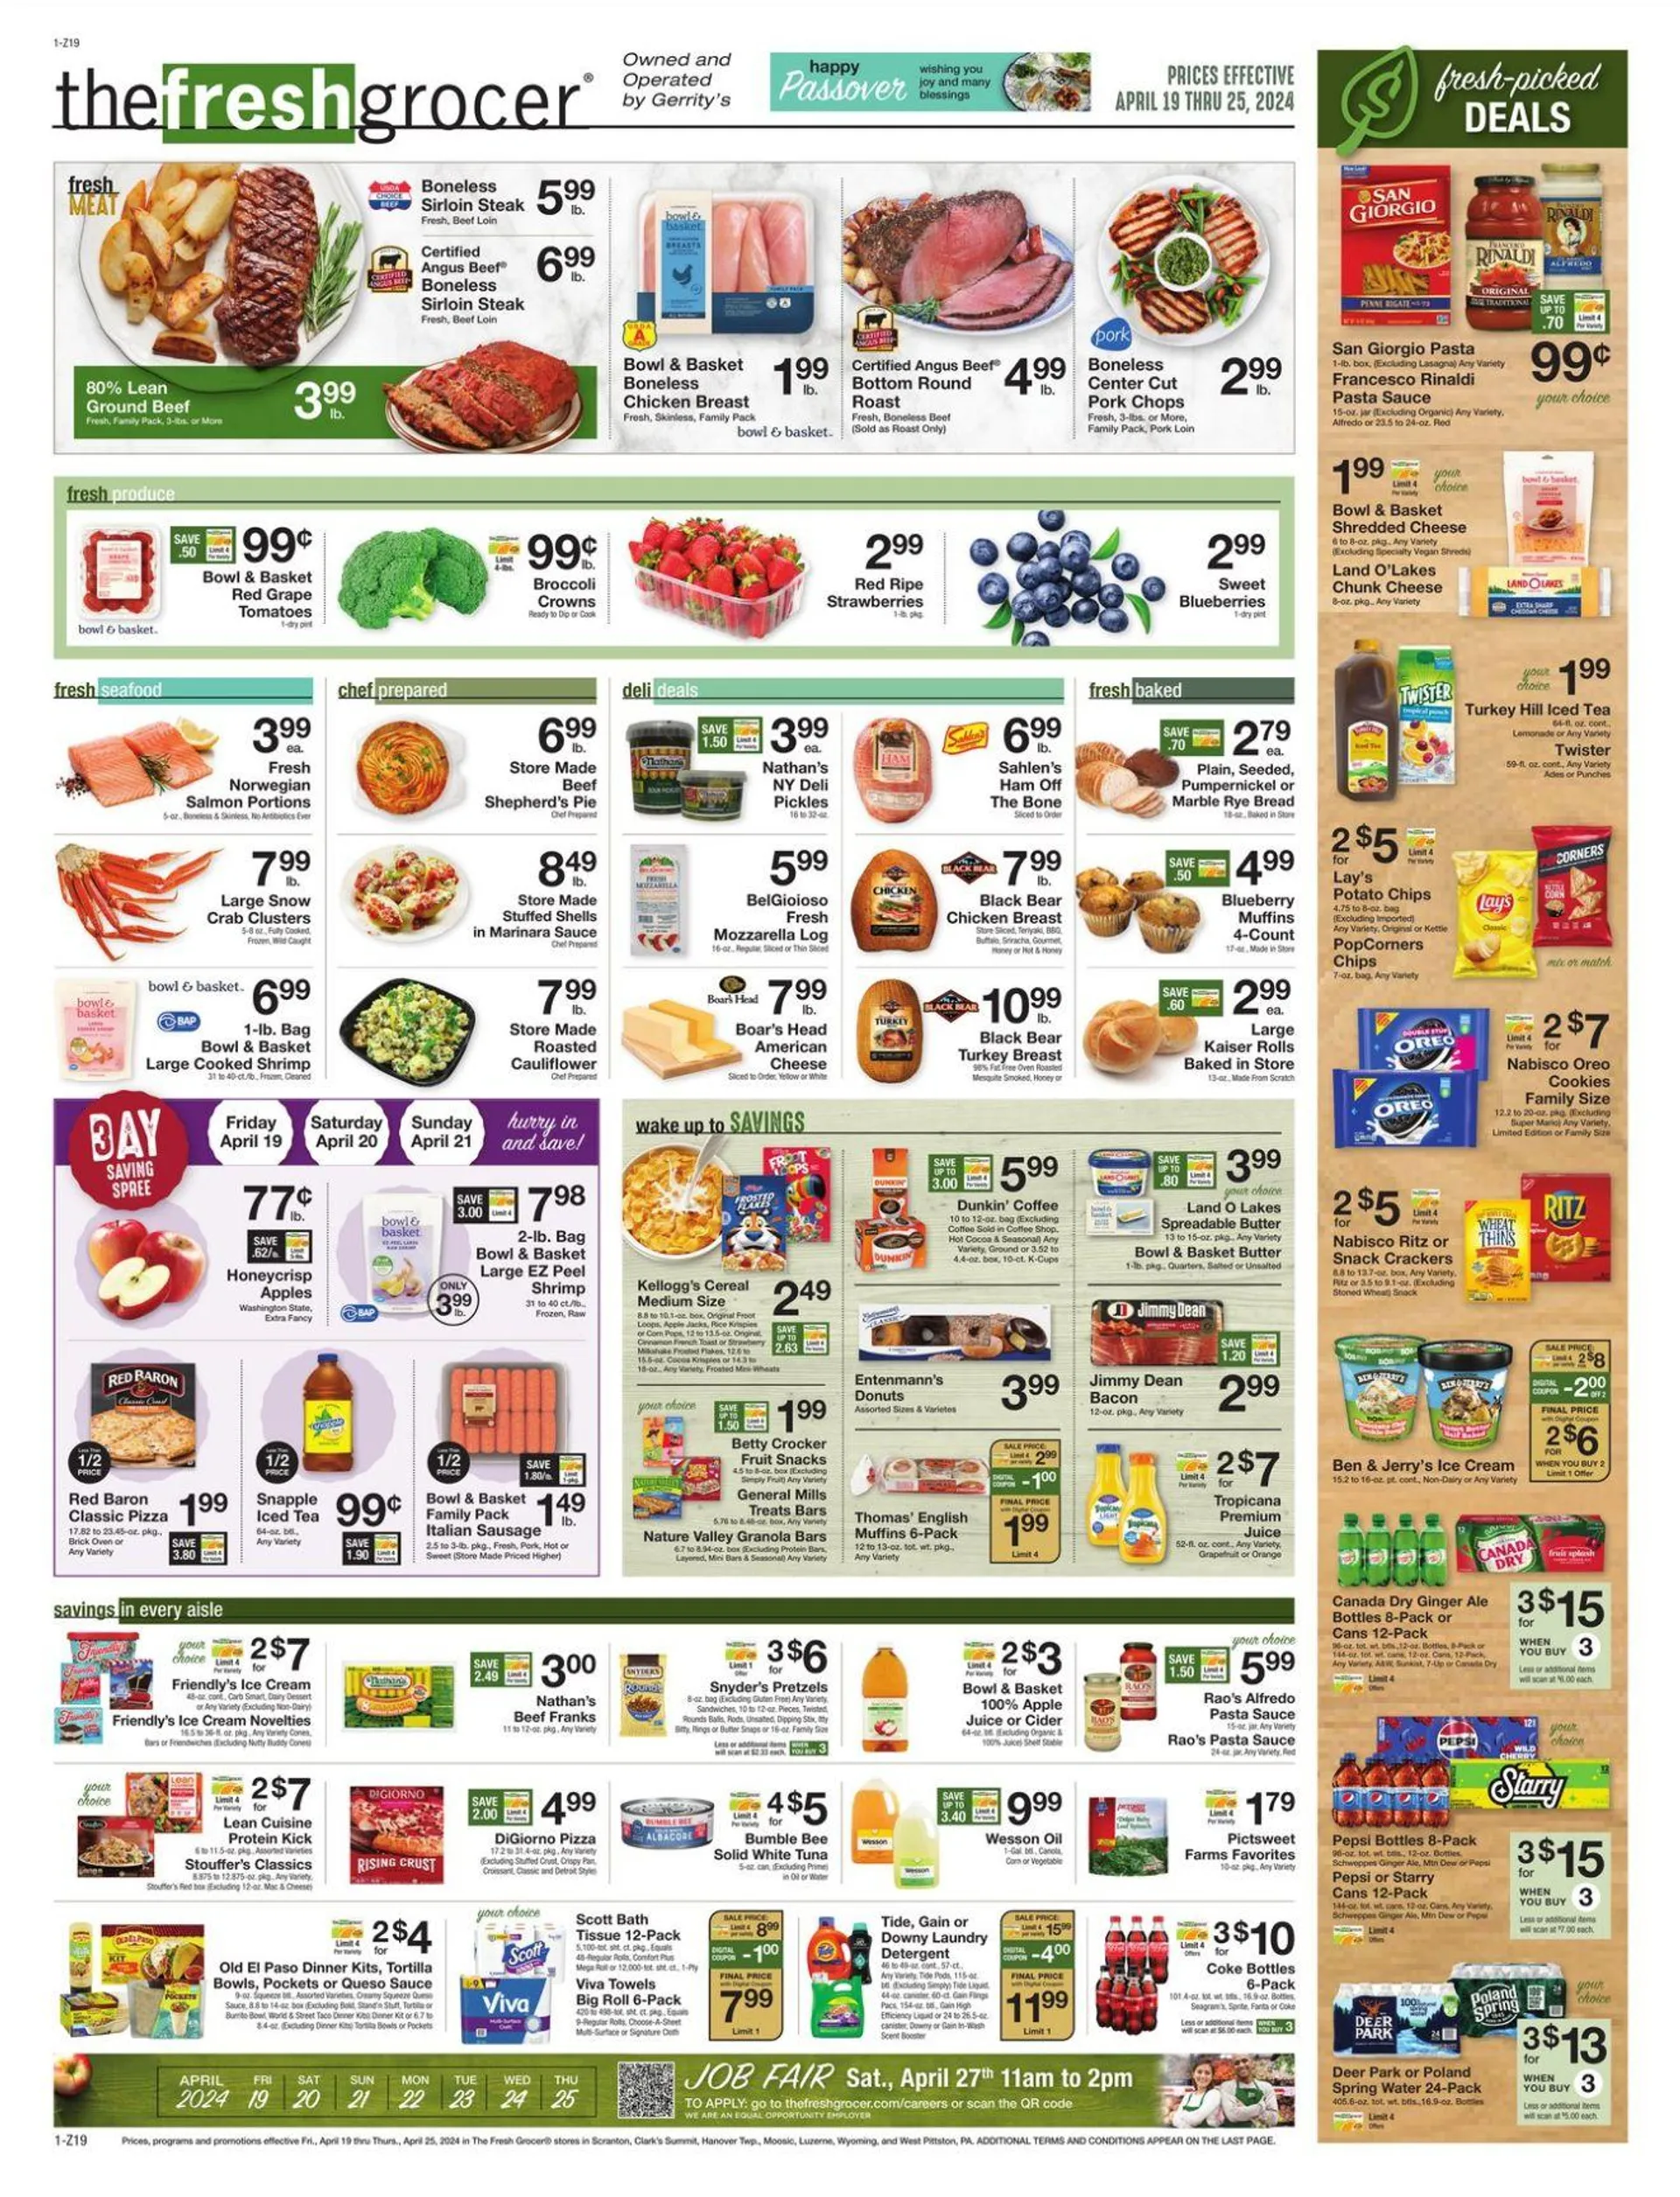 Gerritys Supermarkets Current weekly ad - 1